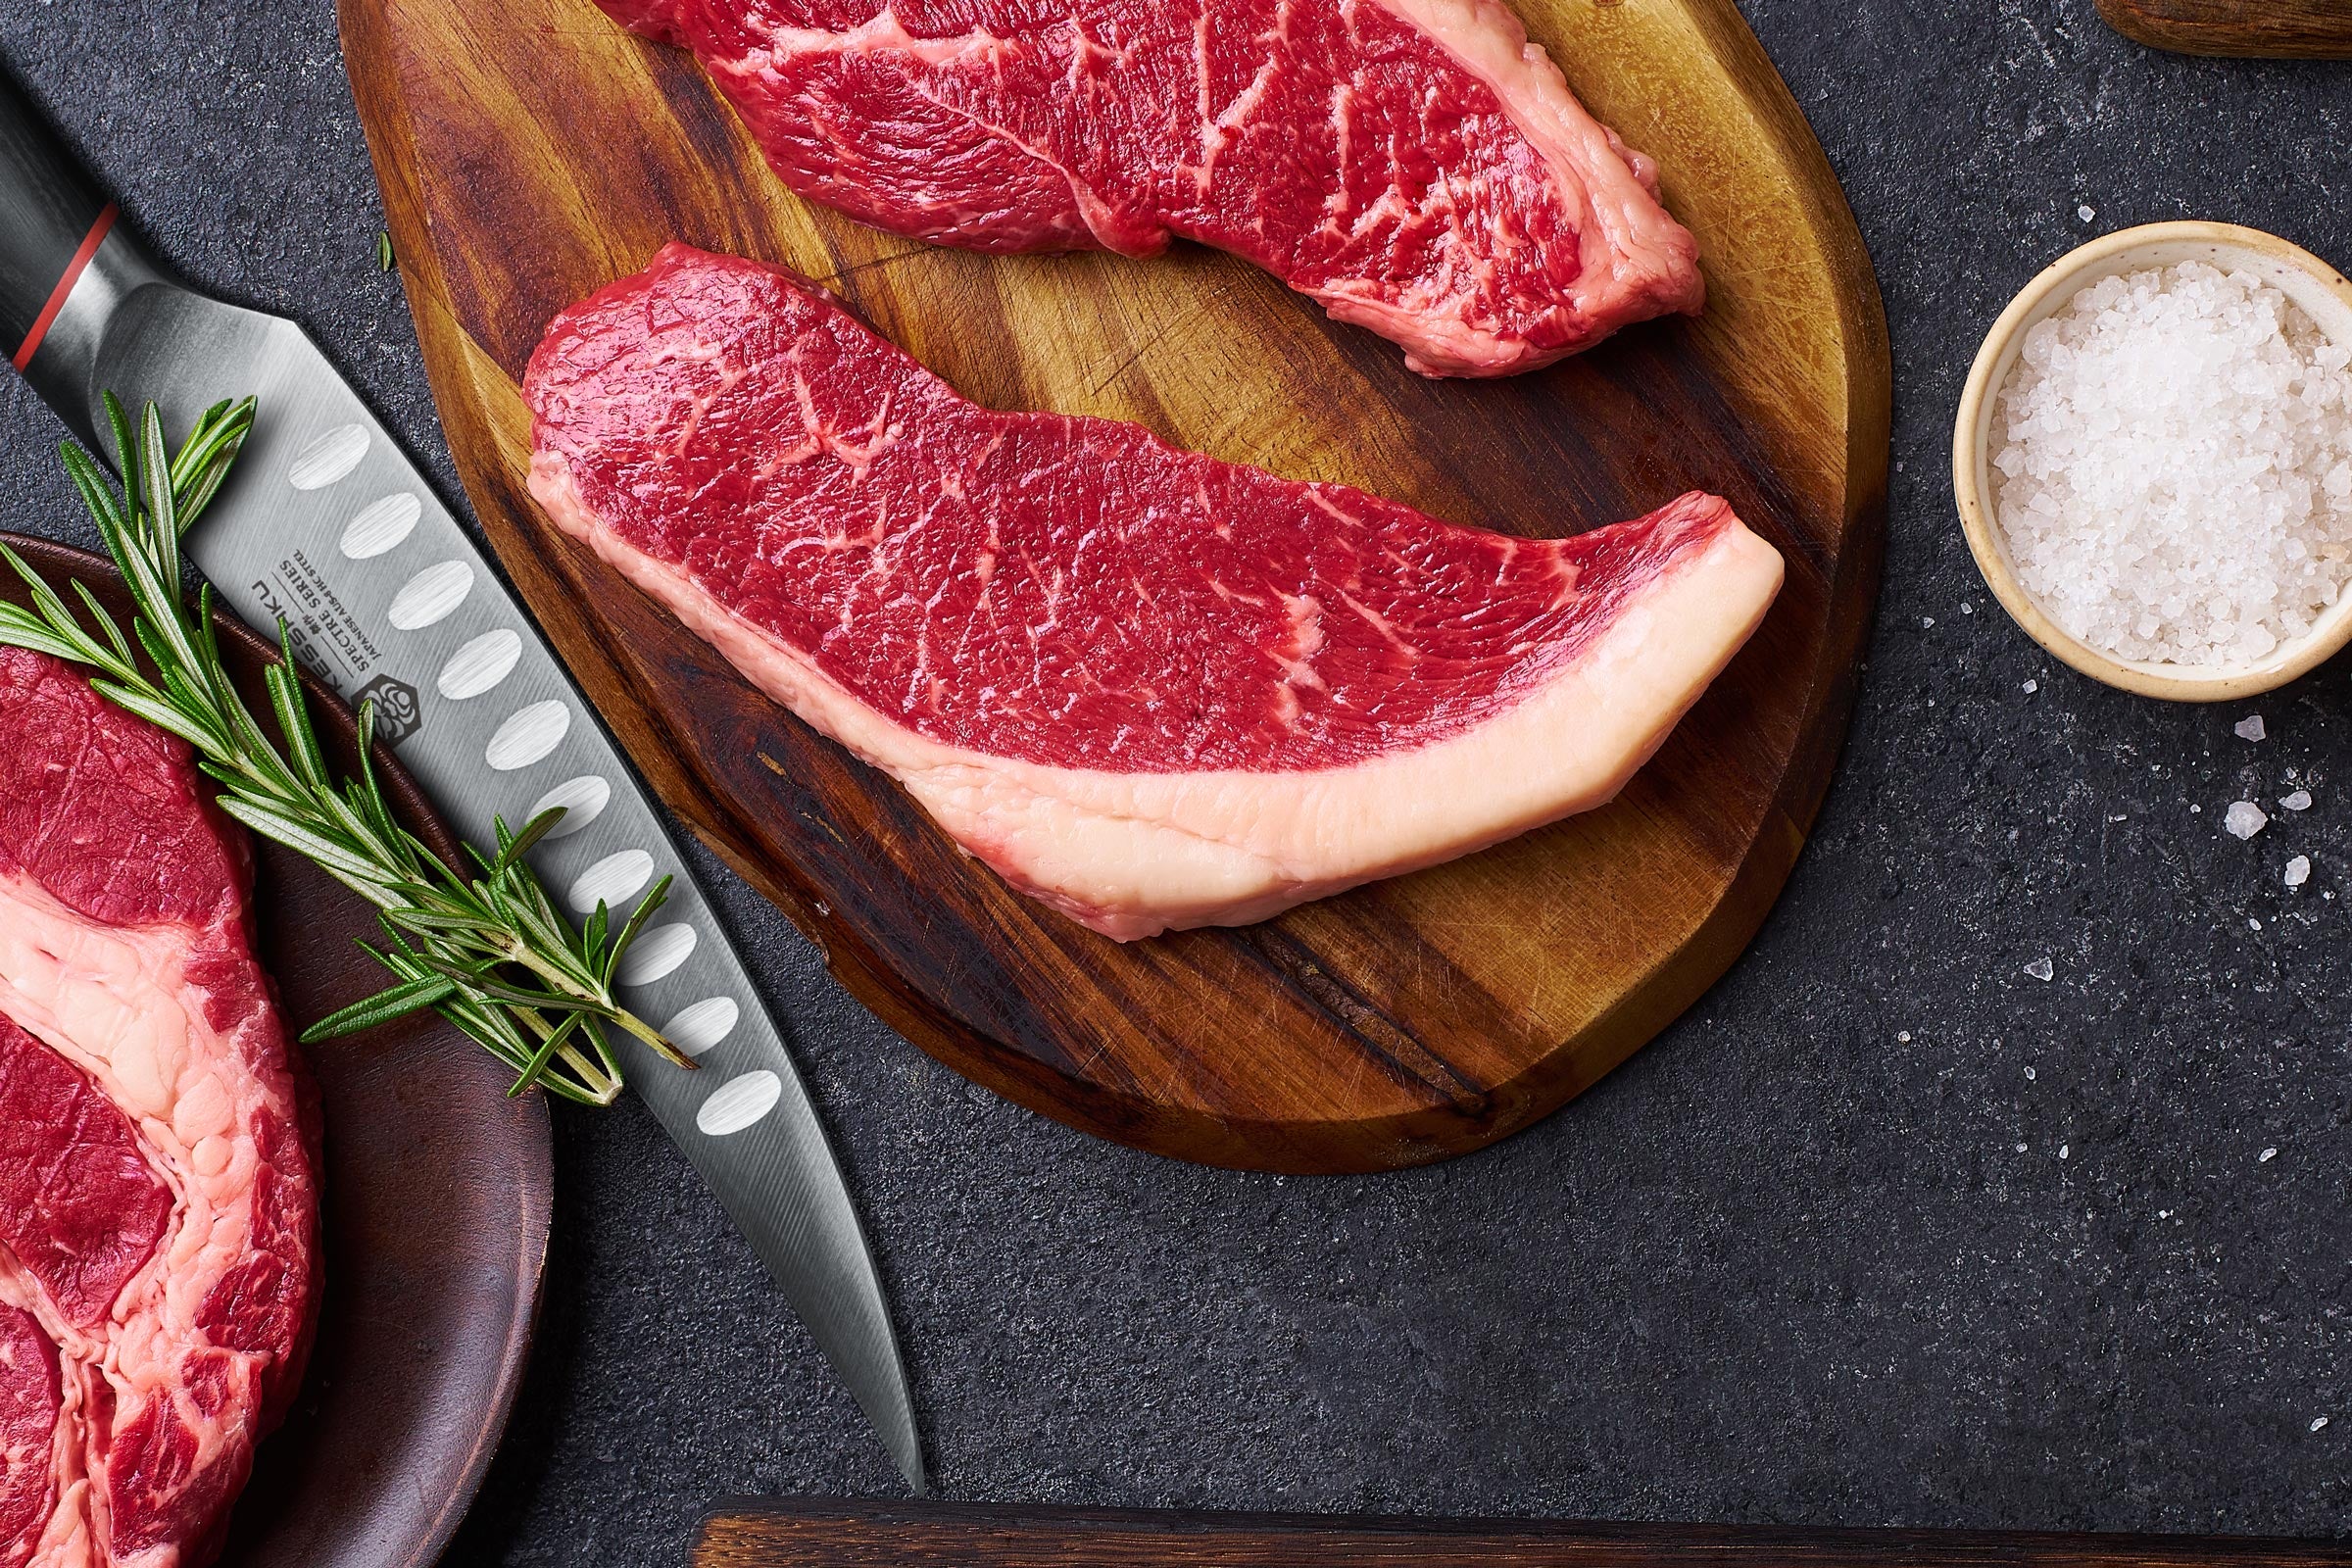 The Spectre Boning Knife next to perfectly trimmed cuts of steak.